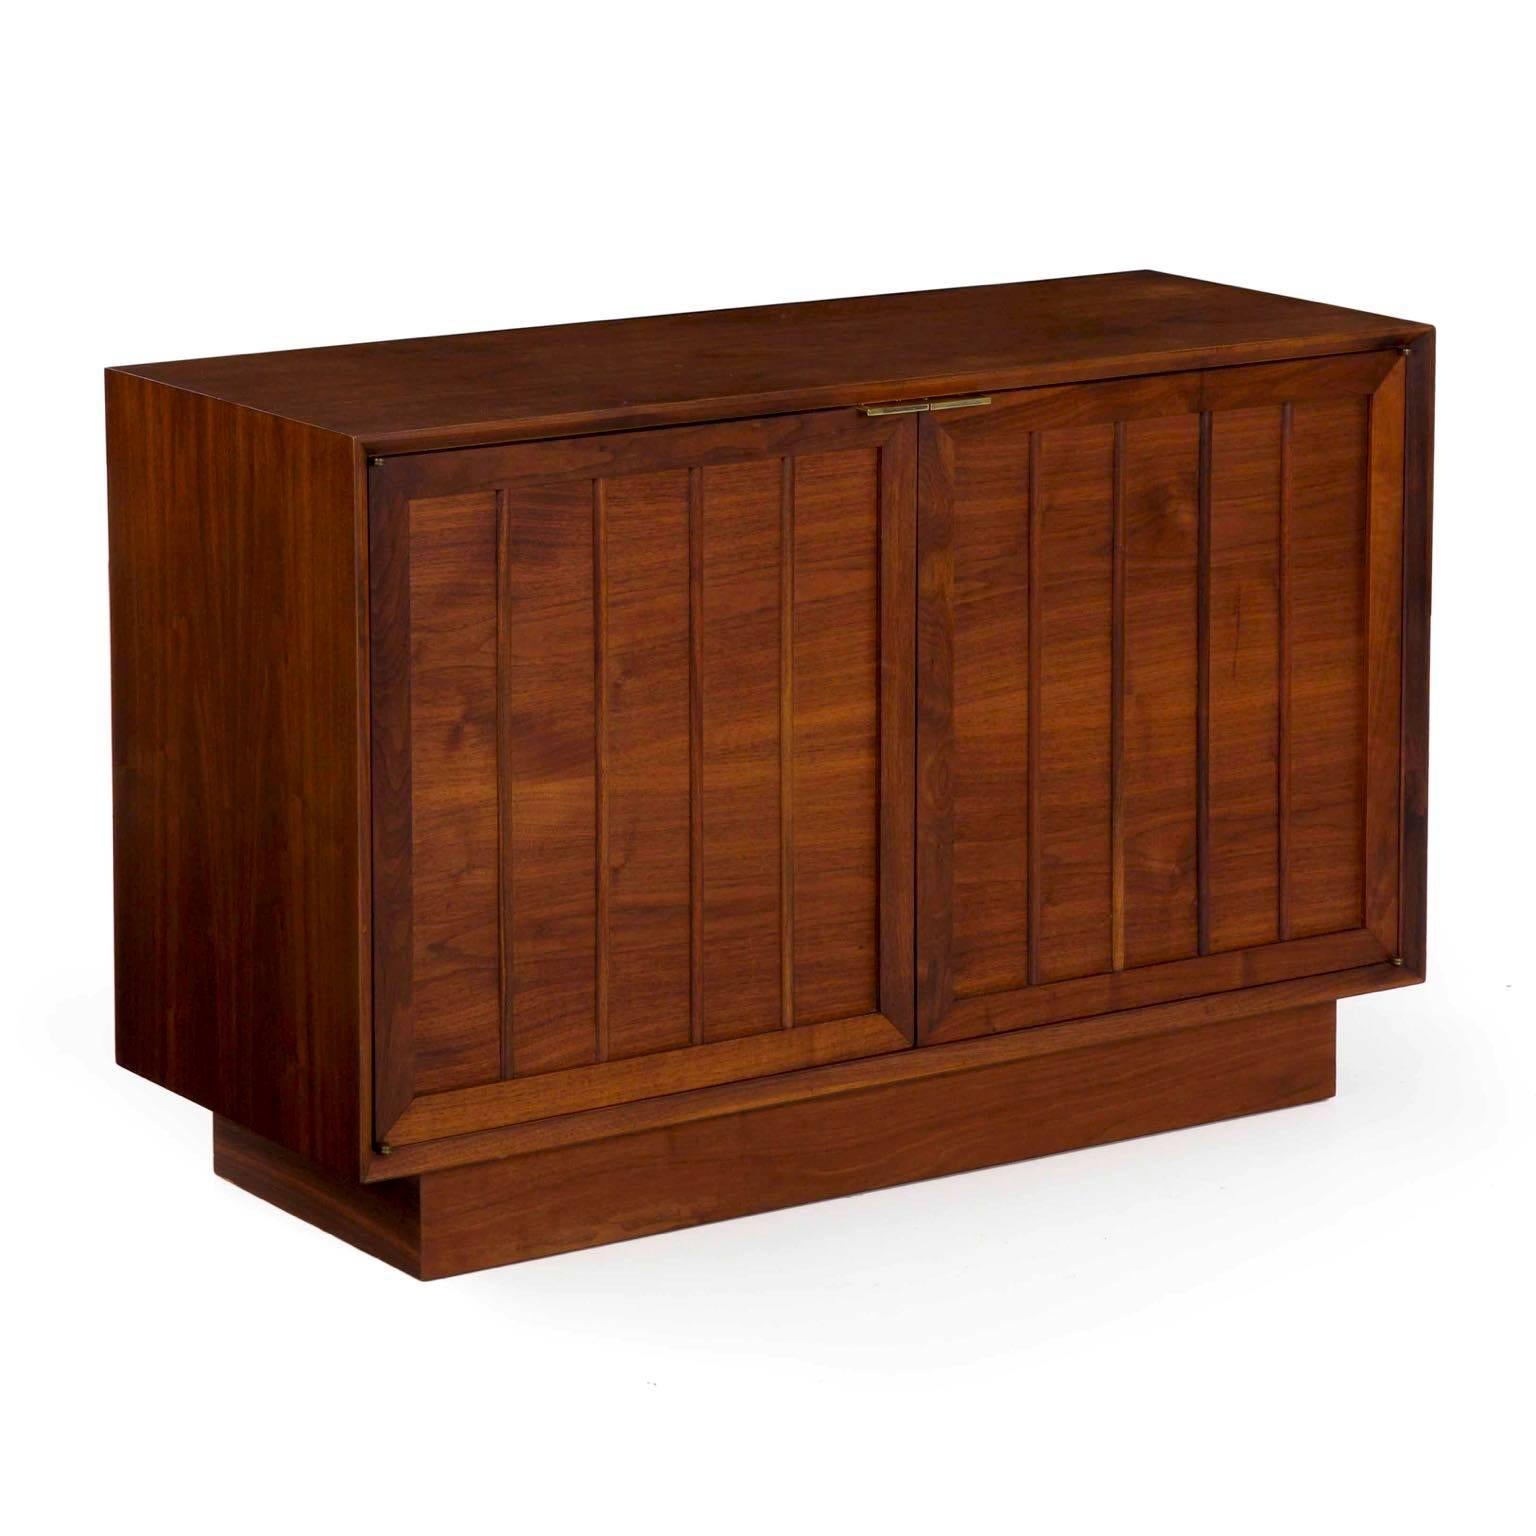 This is a most attractive vintage walnut credenza, designer unknown but very tastefully rendered in the Scandinavian Modern taste. It is austere and leverages the natural beauty of the walnut grain to its fullest, this flowing beautifully from one